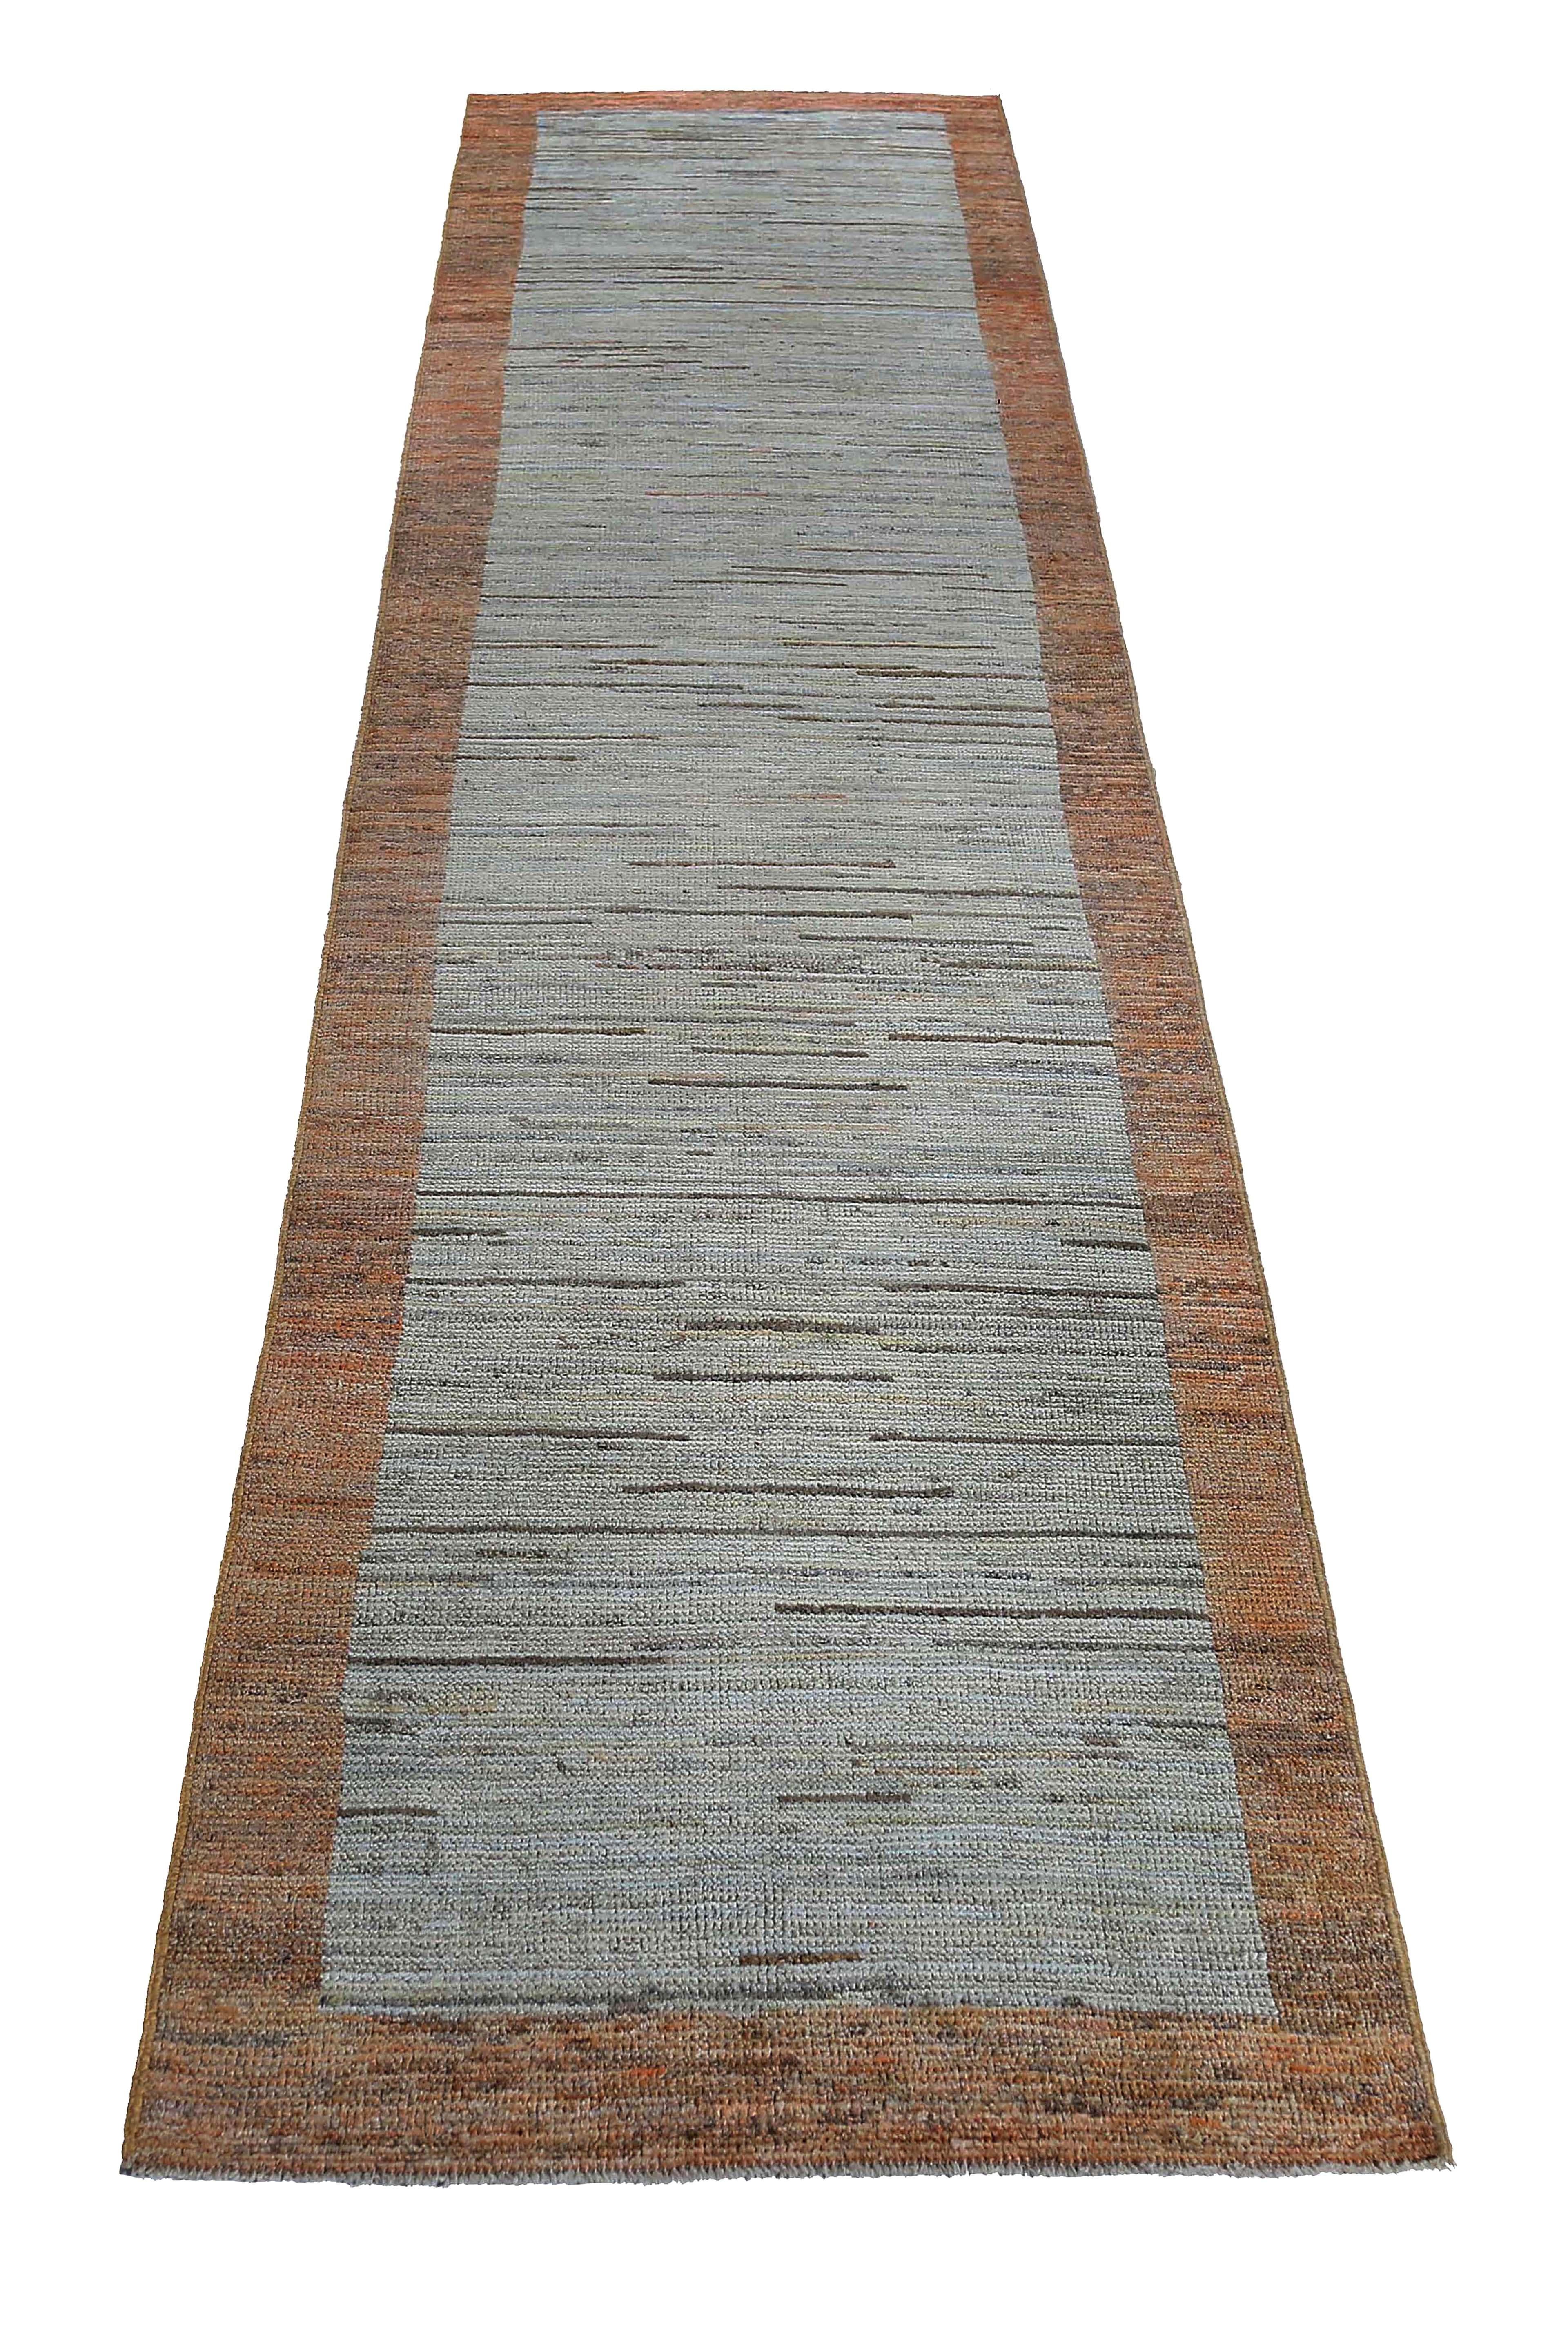 Our Turkish Oushak runner in the size of 3'2'' x 15'7'' is a beautiful and functional addition to any long hallway or narrow space in your home. Crafted in the traditional style of the Oushak region in Turkey, this runner features a stunning